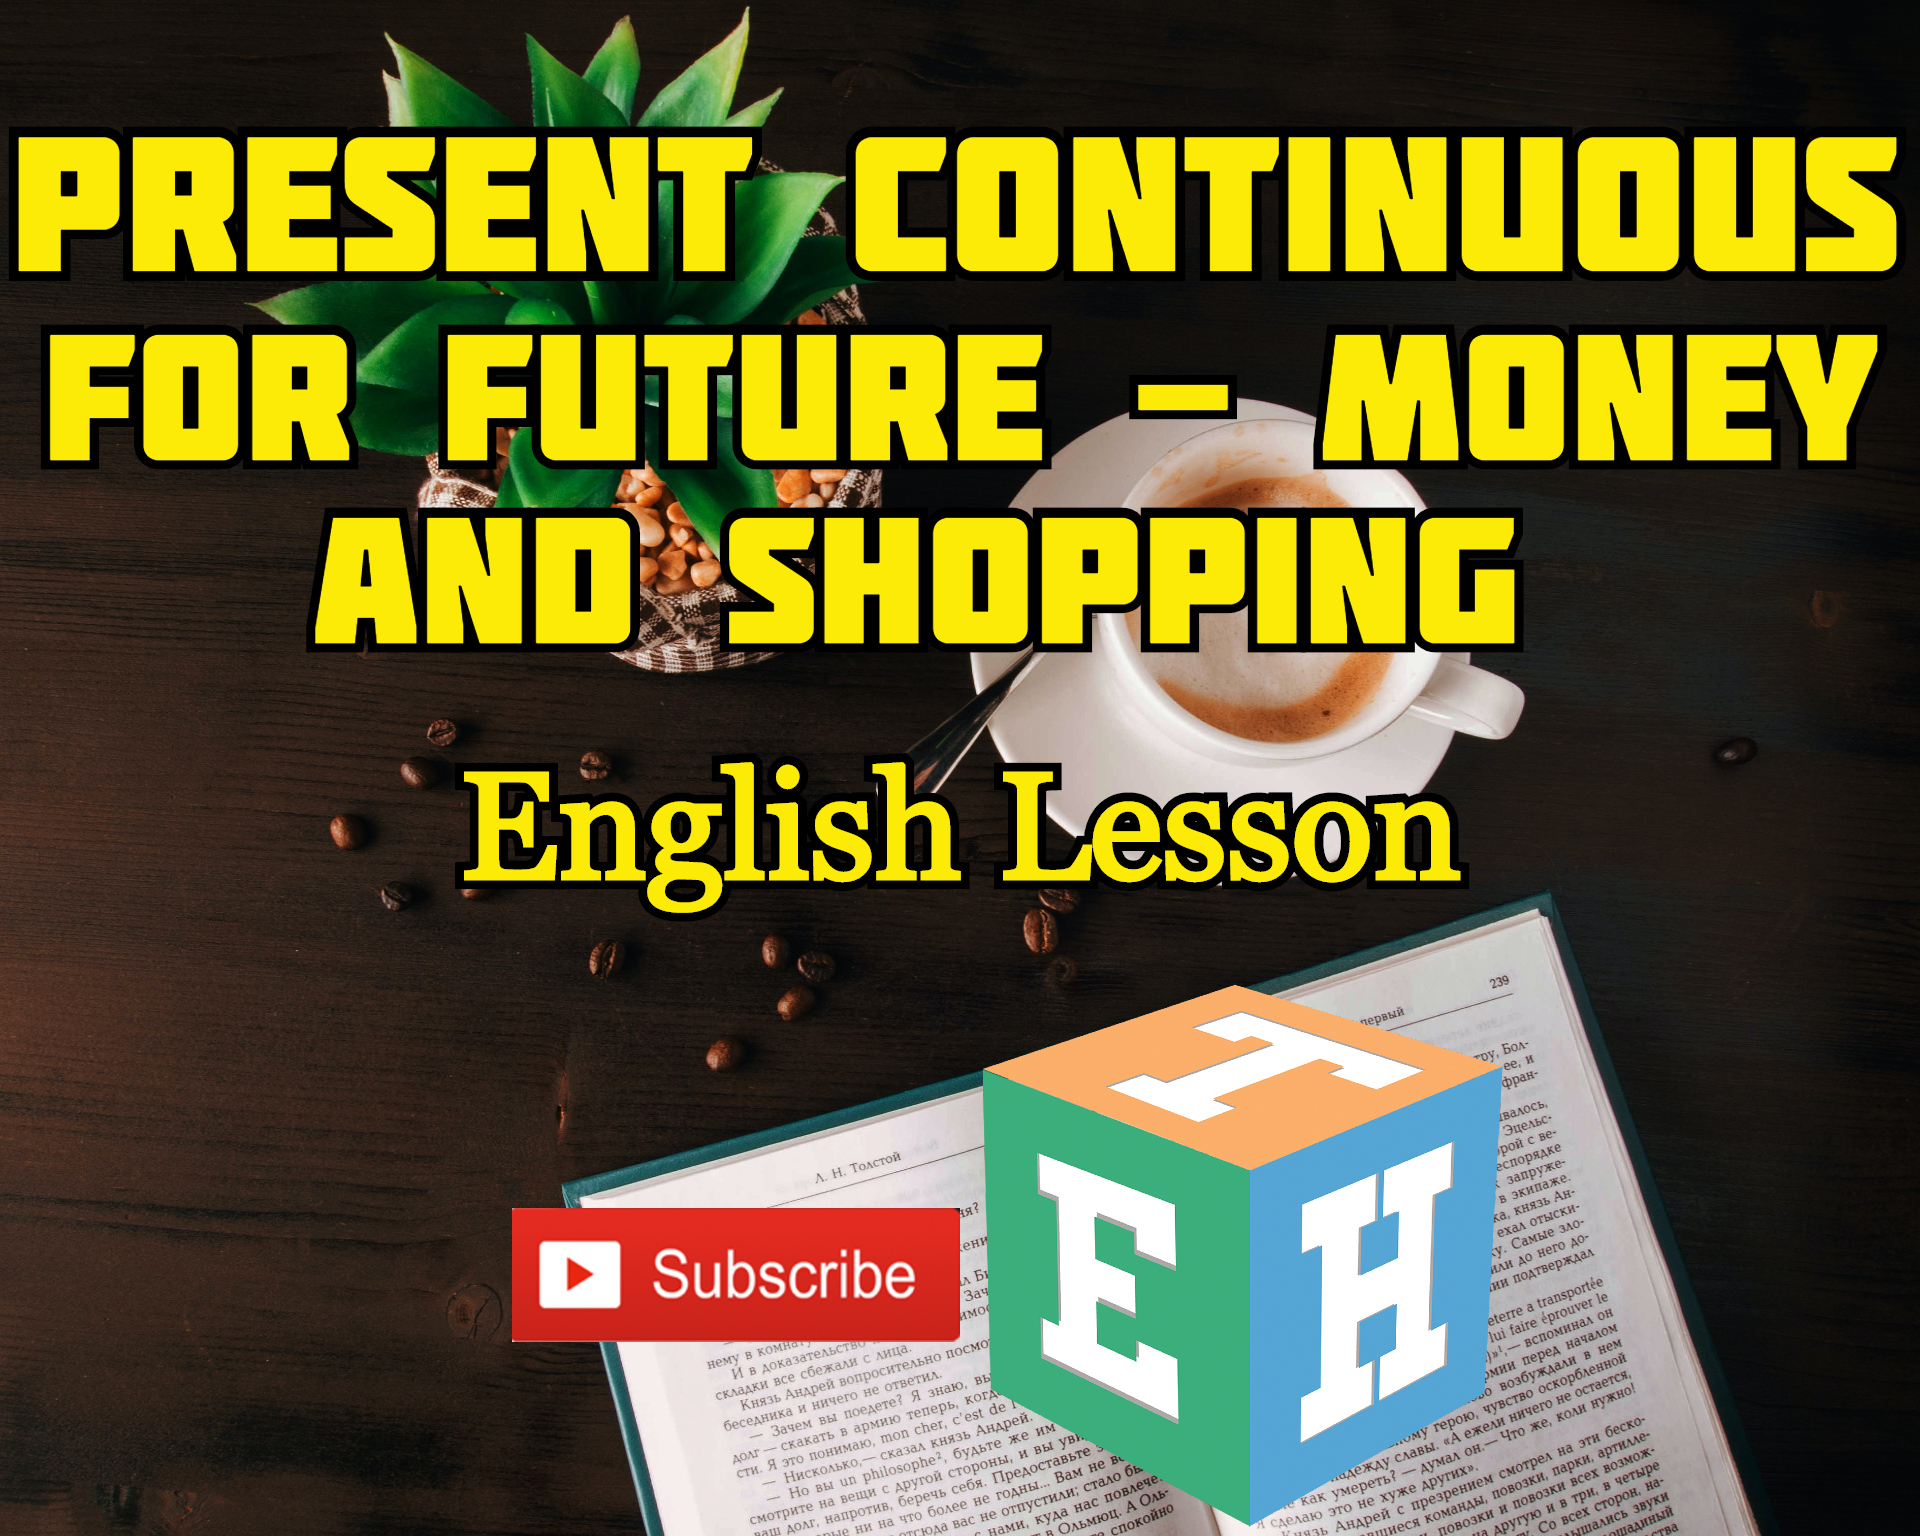 Present Continuous for Future - Money and Shopping